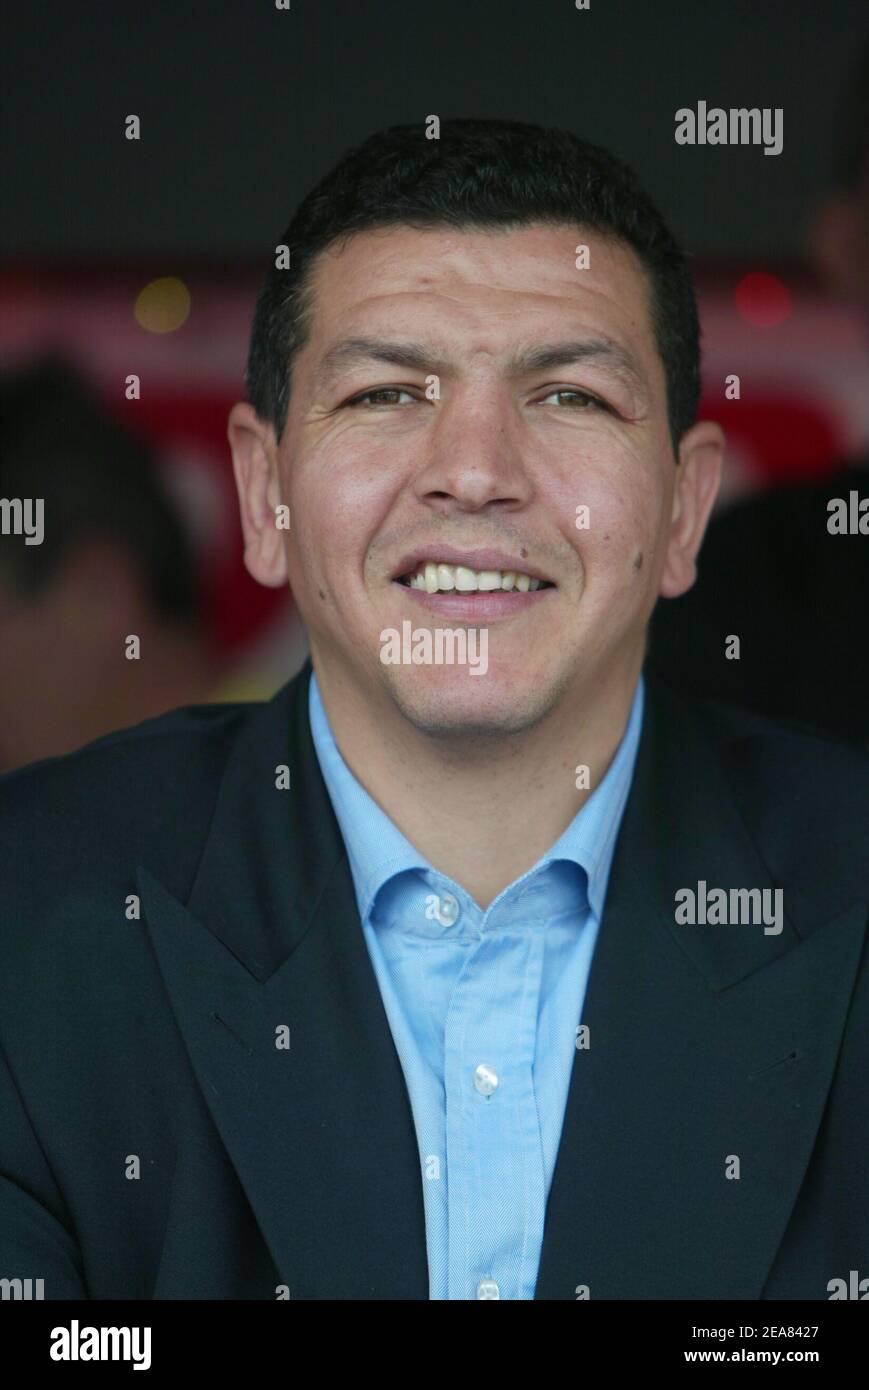 Former French rugbyman Abdelatif Benazzi attends the celebration of the 160th anniversary of the Parisian Francs-Bourgeois school to the benefit of charitable organizations at the Pershing stadium in Paris-France on Friday, May 14, 2004. Photo by Mousse/ABACA. Stock Photo